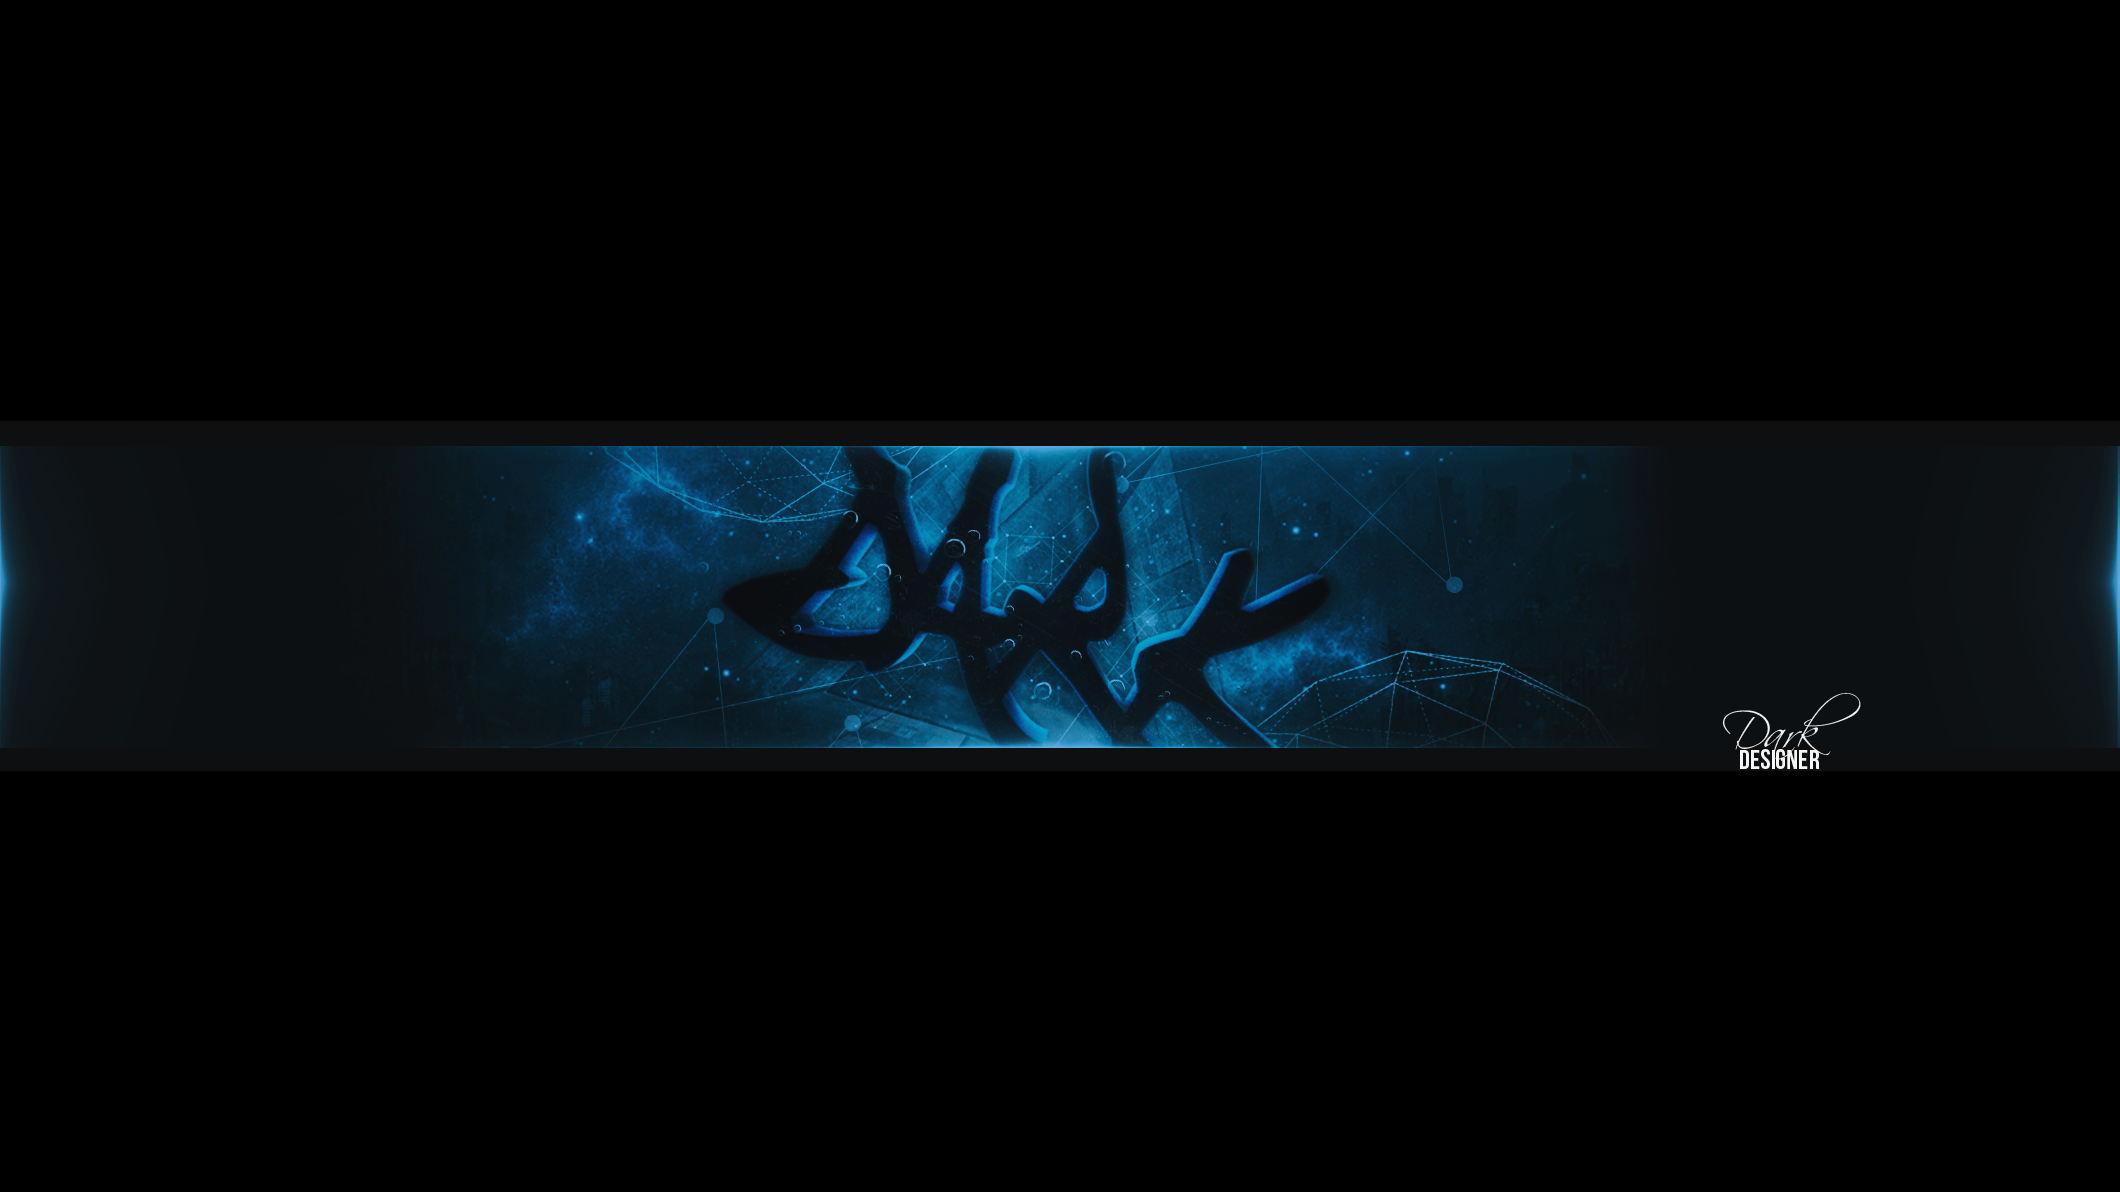 21 New Youtube Banner Maker 2560x1440 Free - banner para youtube 2560x1440 roblox